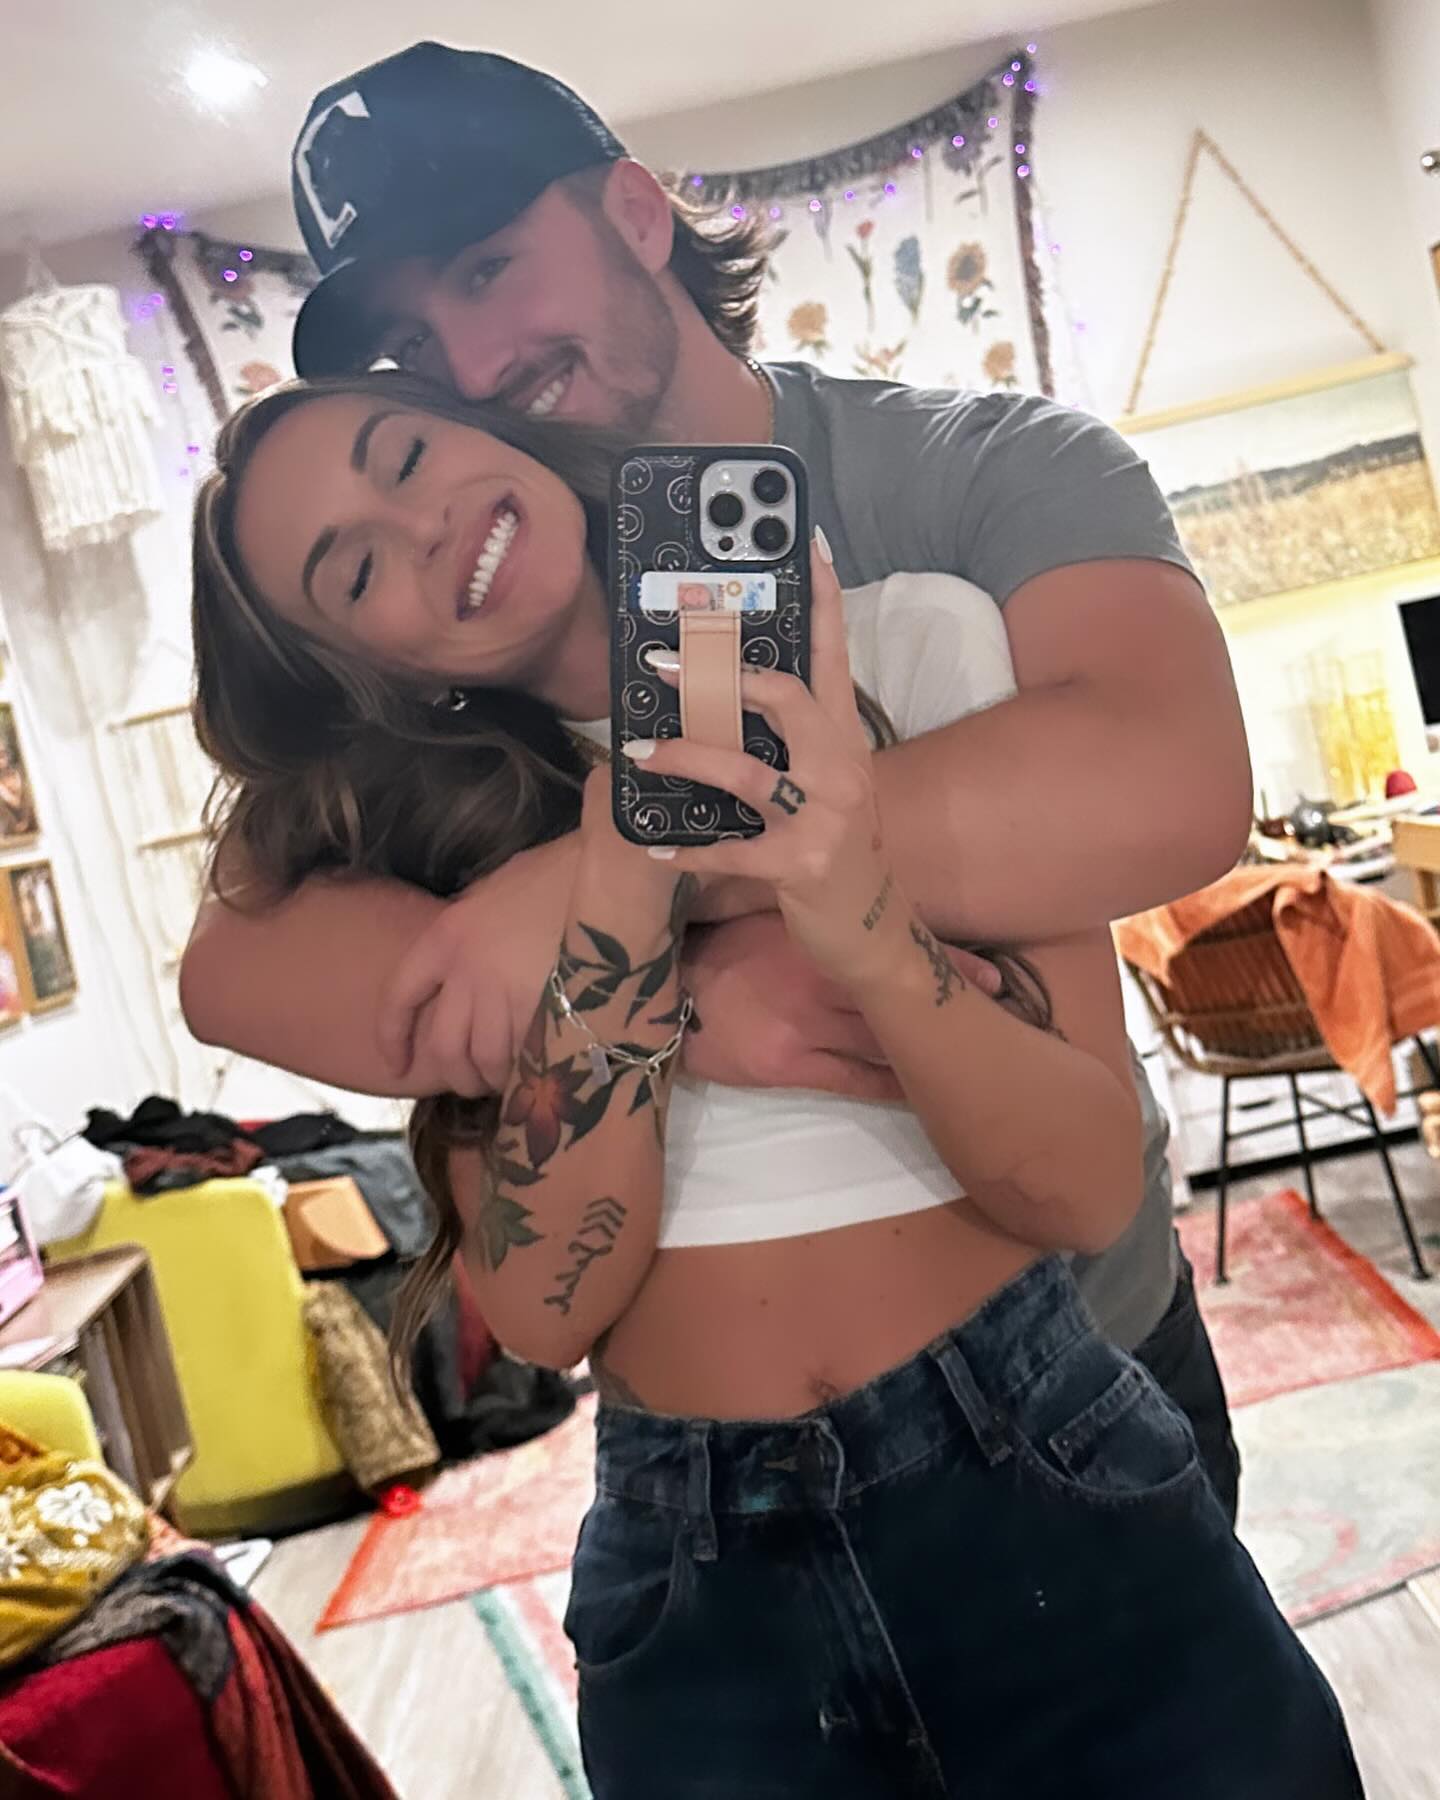 Last week, it was revealed that KT and her beau, Luke Scornavacco, secretly tied the knot five days after announcing their engagement